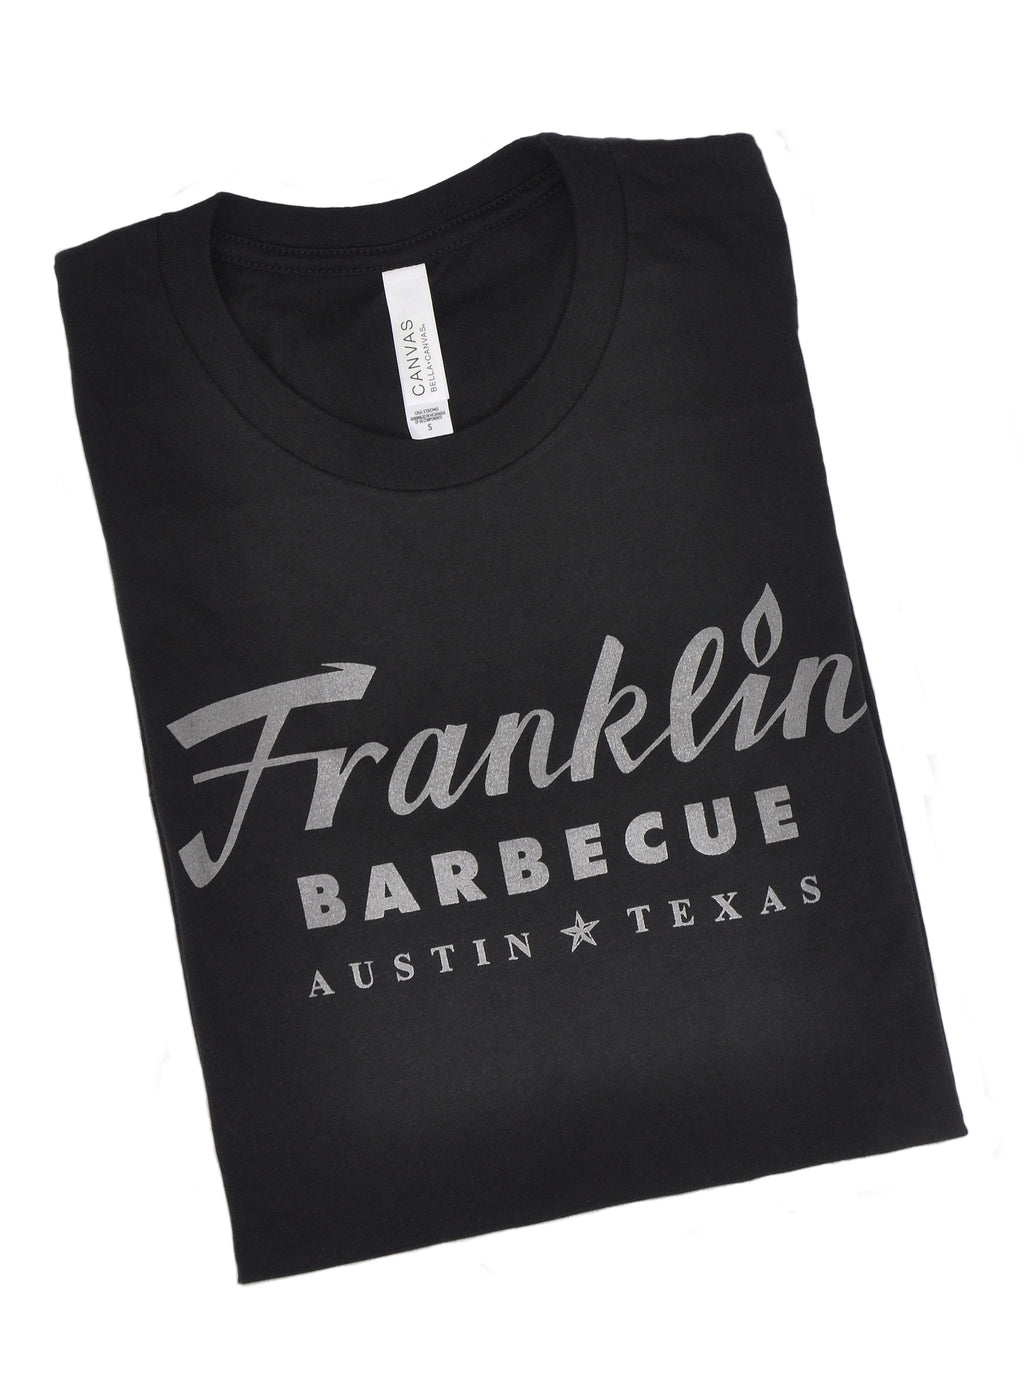 Black t-shirt with Franklin Barbecue text logo in dark silver metallic print.